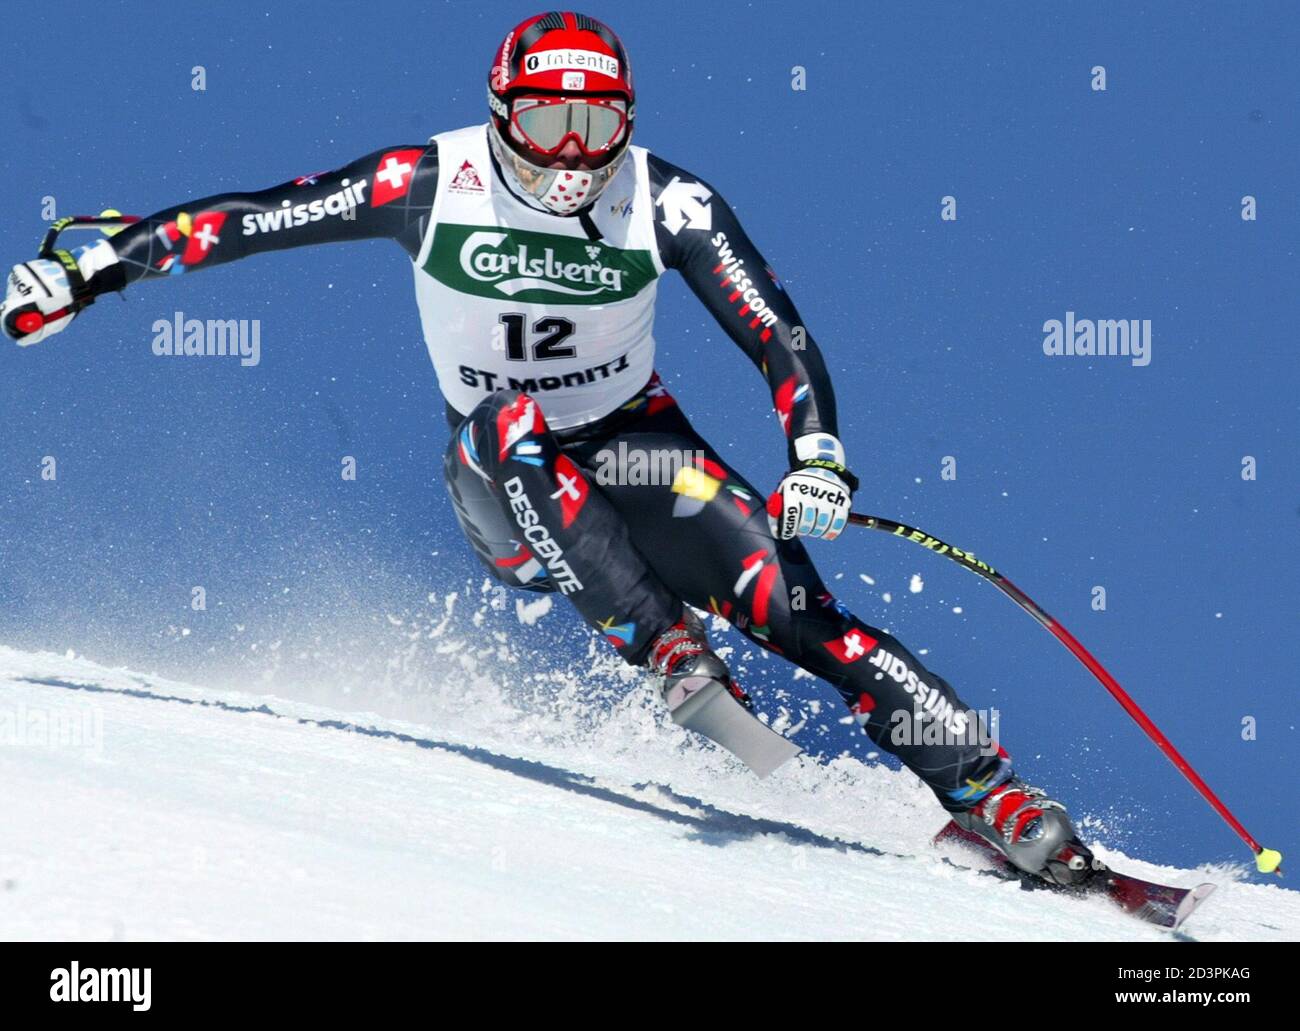 Franco Cavegn of Switzerland trains for the Alpine Skiing World Cup men's  downhill in St. Moritz February 1, 2002 in a time of one minute 41.46  seconds. REUTERS/Marcus Gyger PLA Stock Photo - Alamy